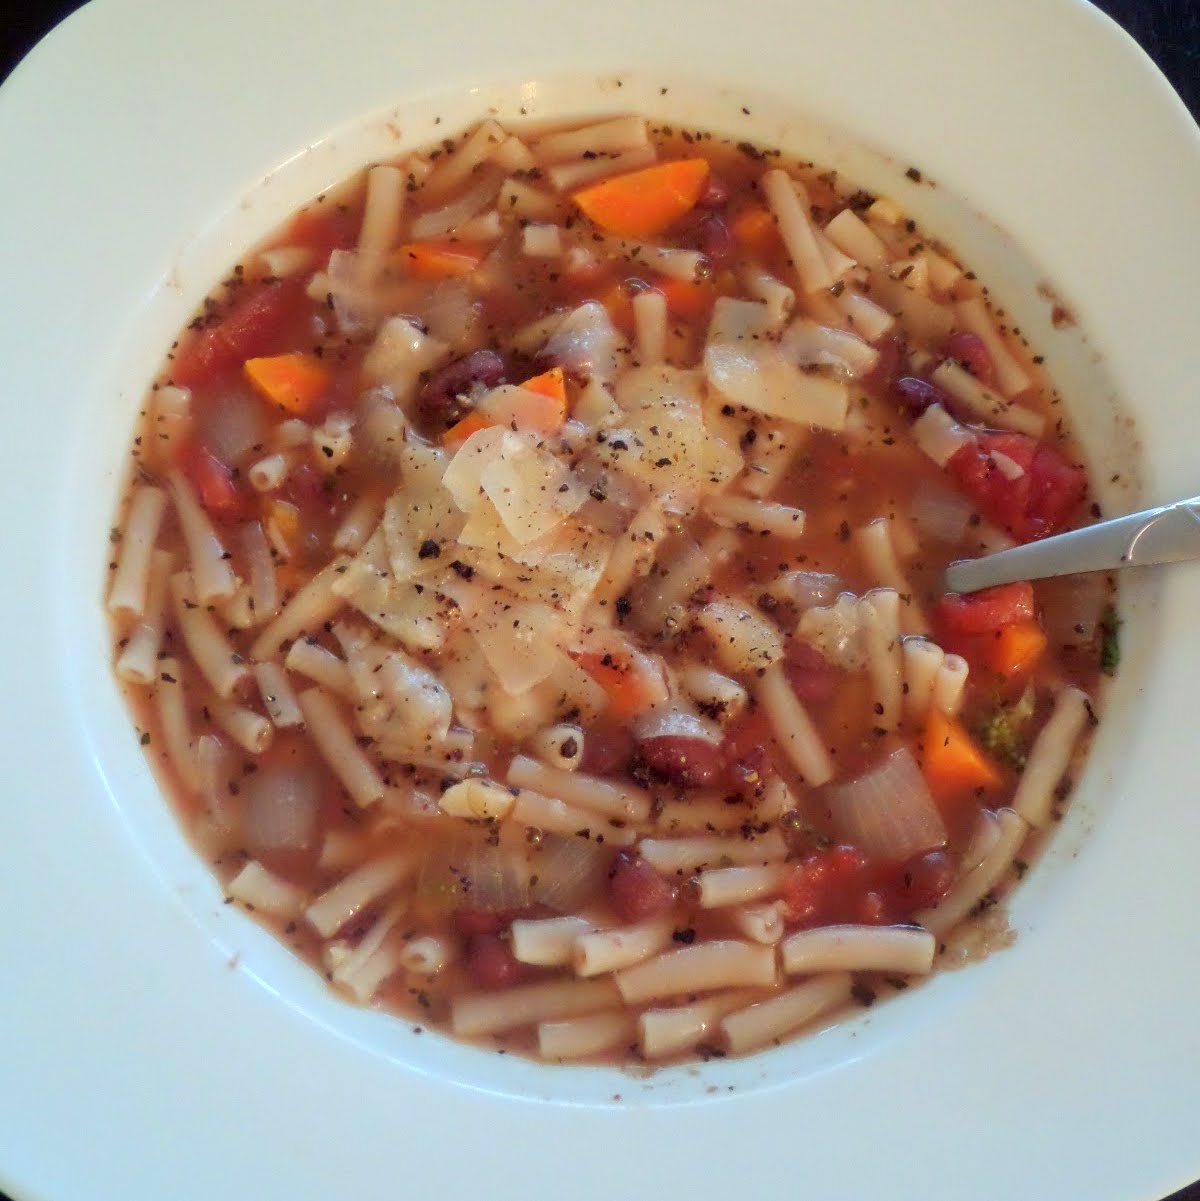 Minestrone Soup:  A simple, vegetarian, Italian style soup made with vegetables, beans, pasta, tomatoes and spices.